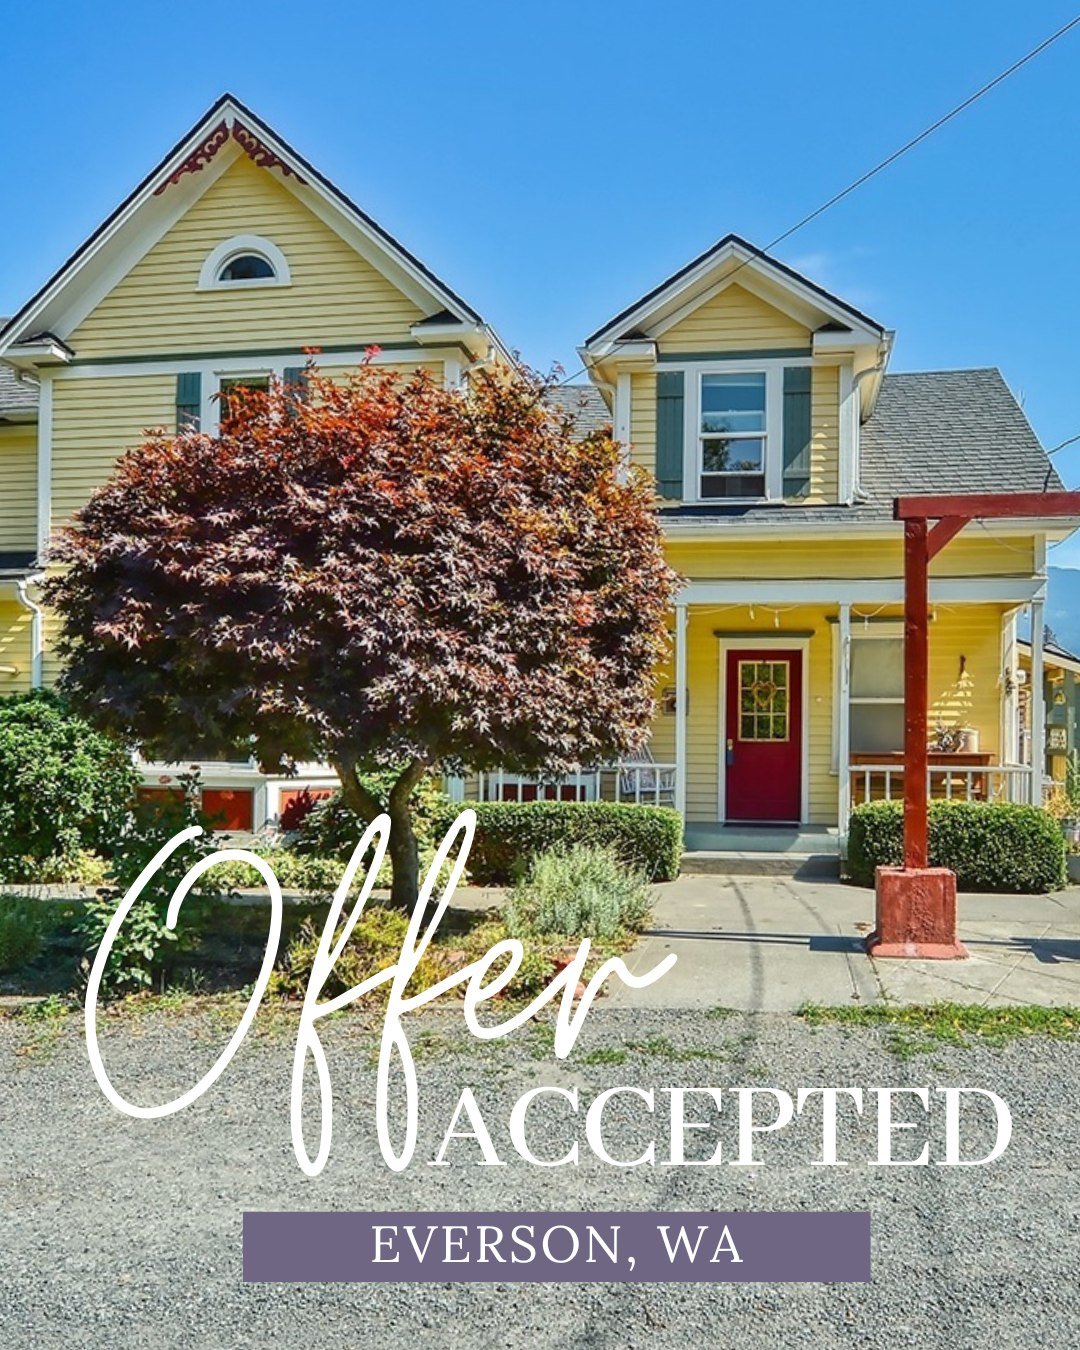 The market is HOT! 🔥

In the last two weeks, our listings have been getting consistent activity and showings. We finished last weekend with 2 of our listings going pending, one even having multiple offers. This week we also had buyers get their offe